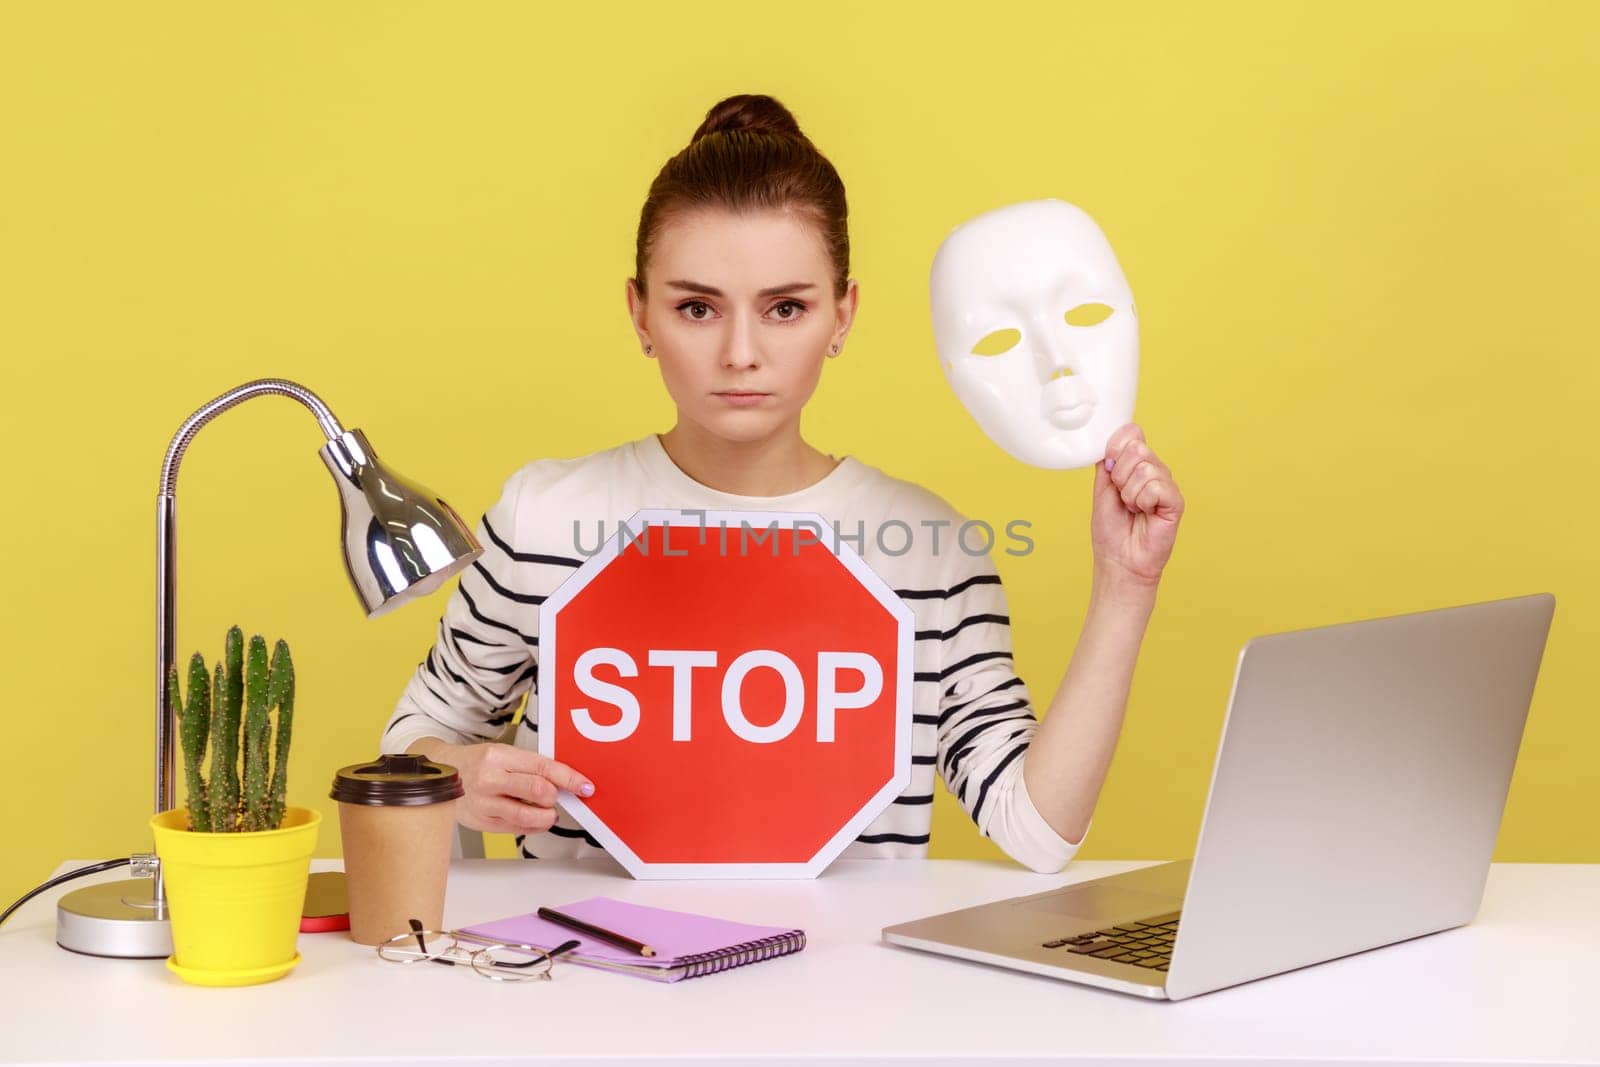 Portrait of serious dark haired woman holding white mask with unknown face and red traffic sign while sitting on workplace with laptop. Indoor studio studio shot isolated on yellow background.